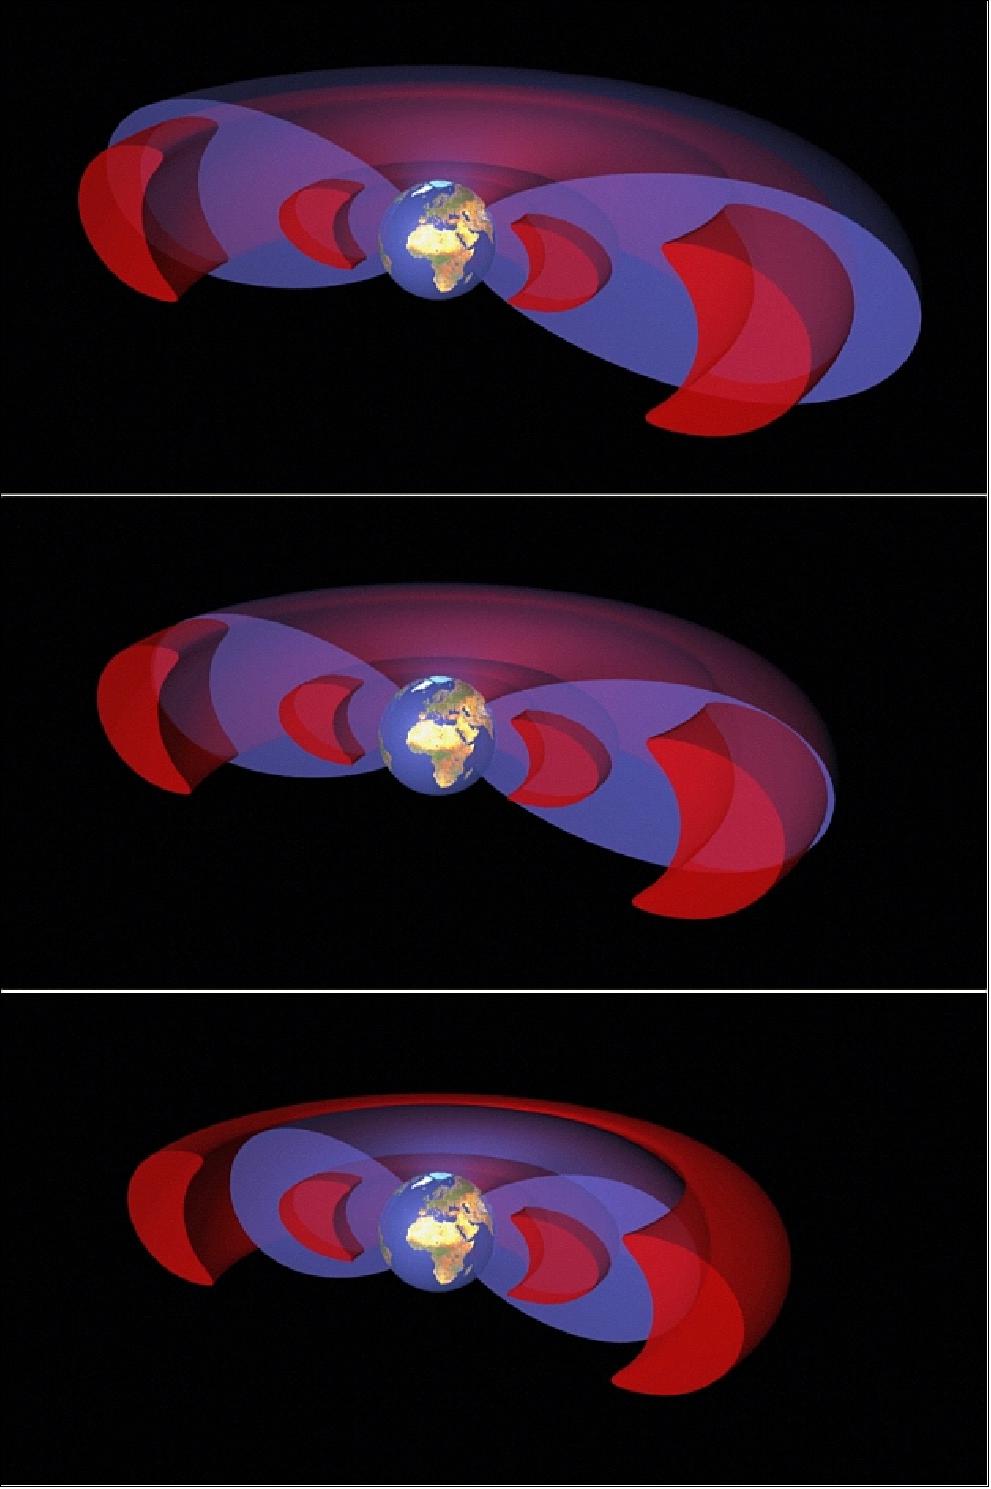 Figure 42: The the panels show how the relative locations of the outer boundary of the Earth's plasmasphere, the plasmapause, (shown in blue) and the van Allen belts (shown in red) change according to geomagnetic conditions (image credit: ESA, C. Carreau)